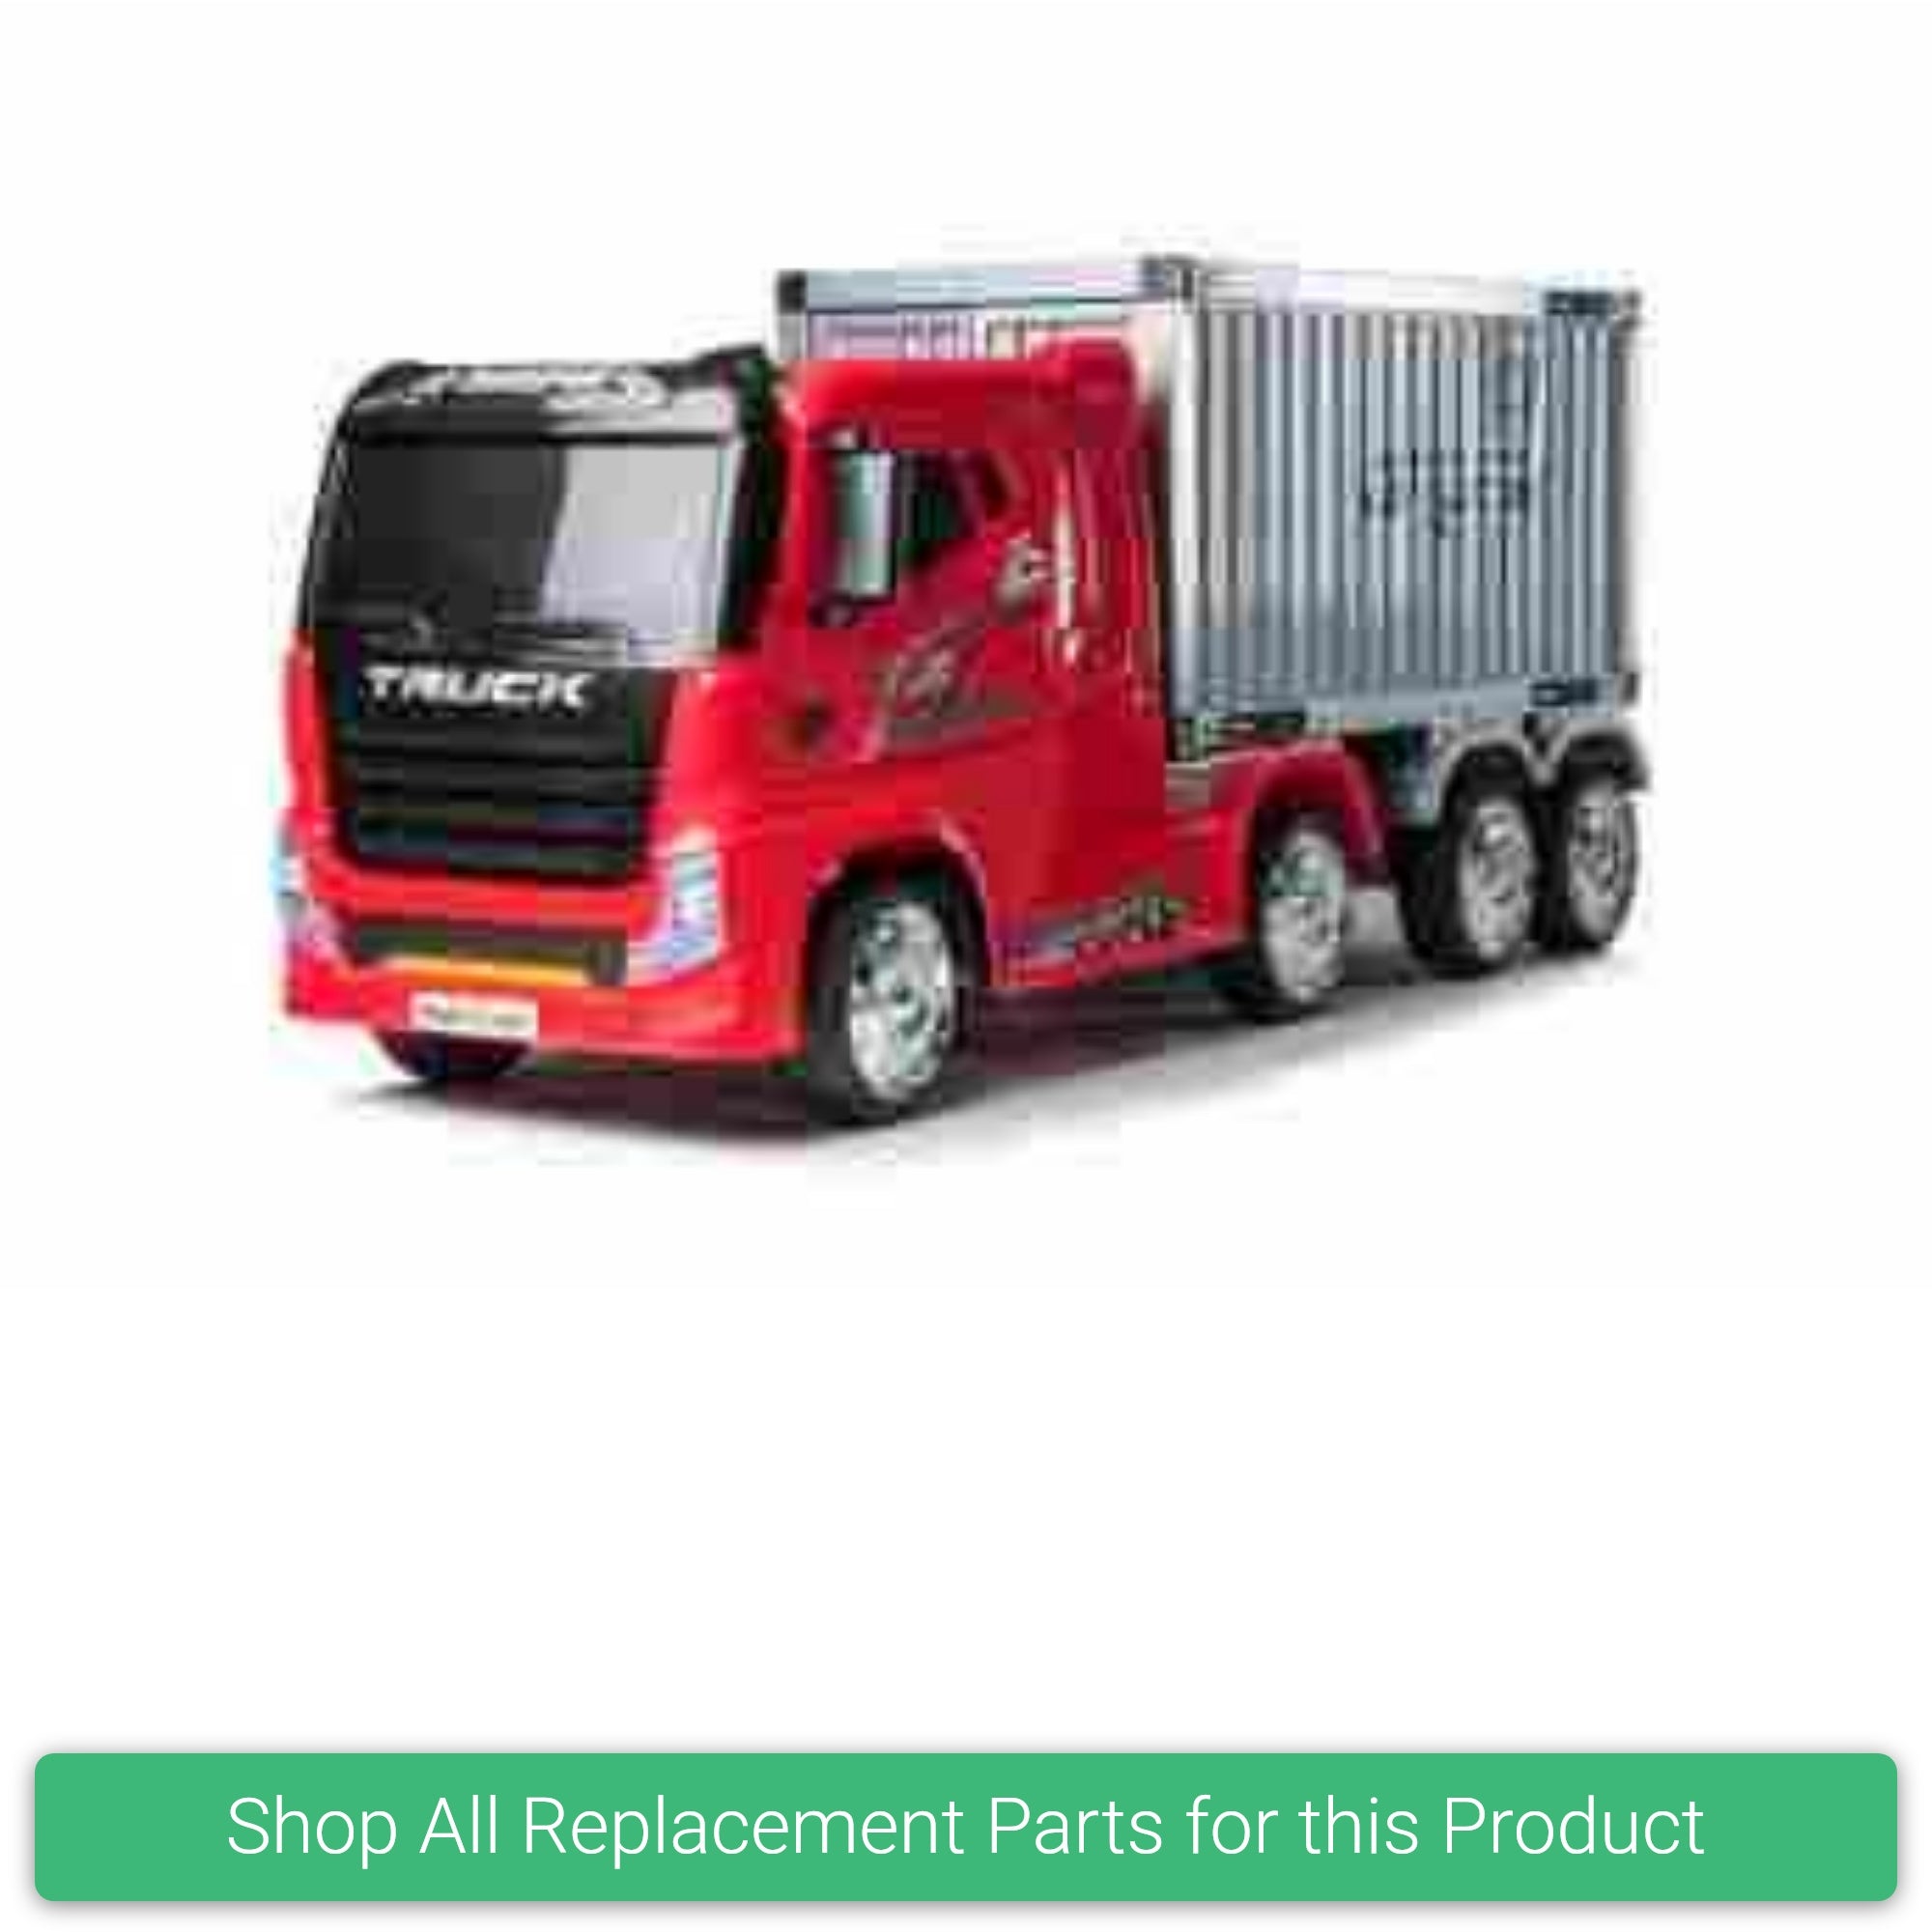 Replacement Parts and Spares for Kids Auto Truck Transporter Lorry With Container - TRANS-20-VARI - JJ2011